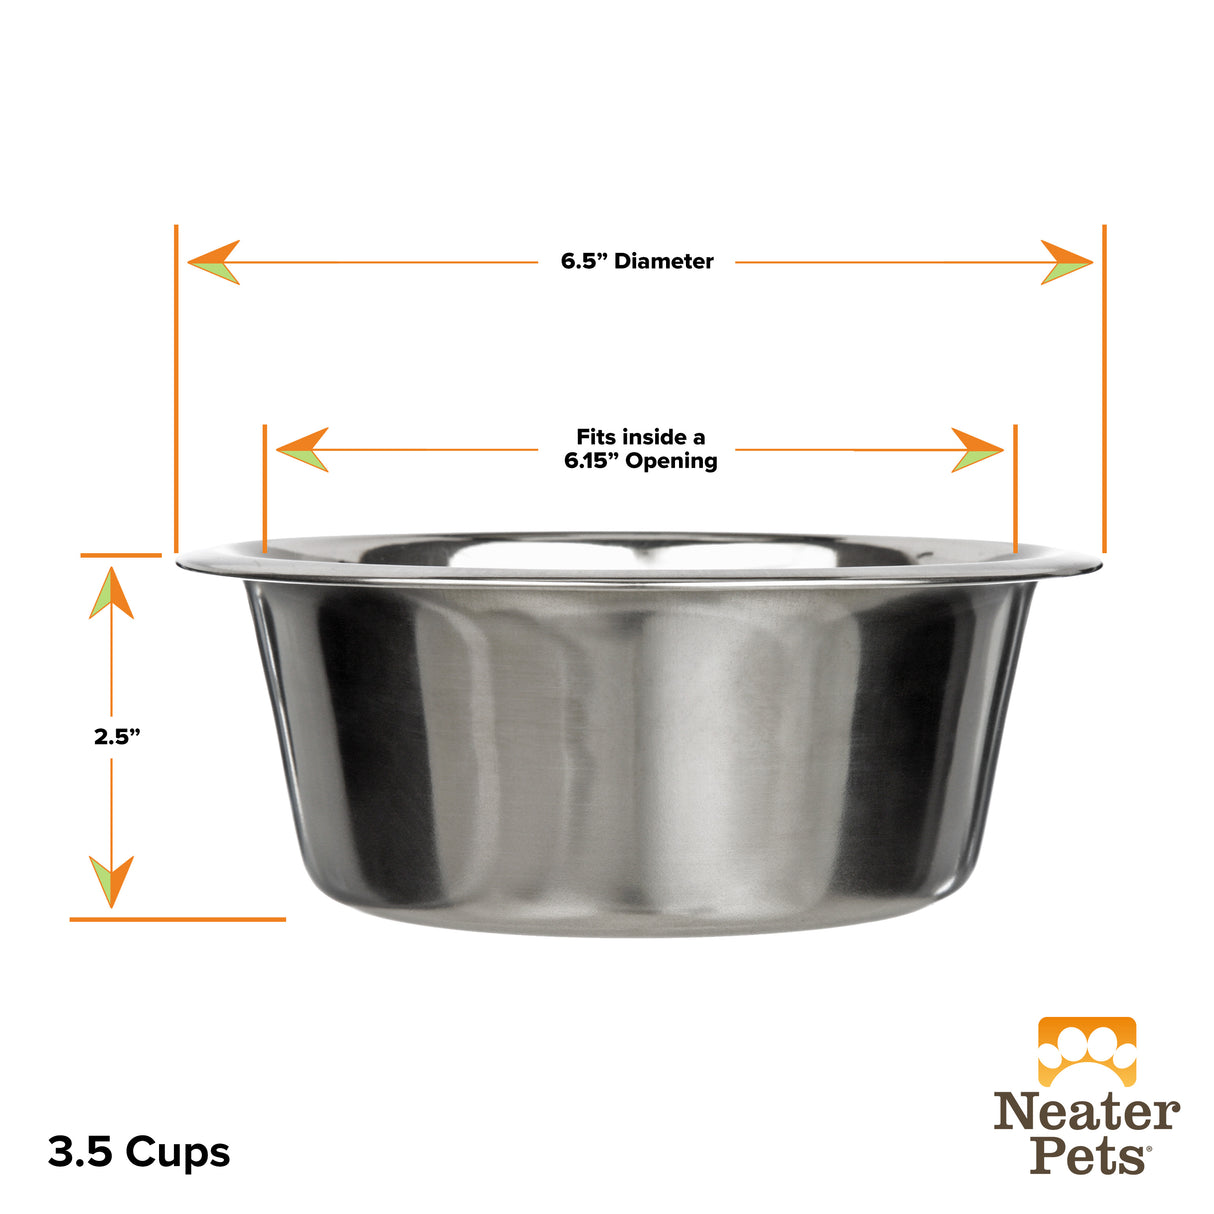 Stainless Steel Bowl 3.5 cup dimensions